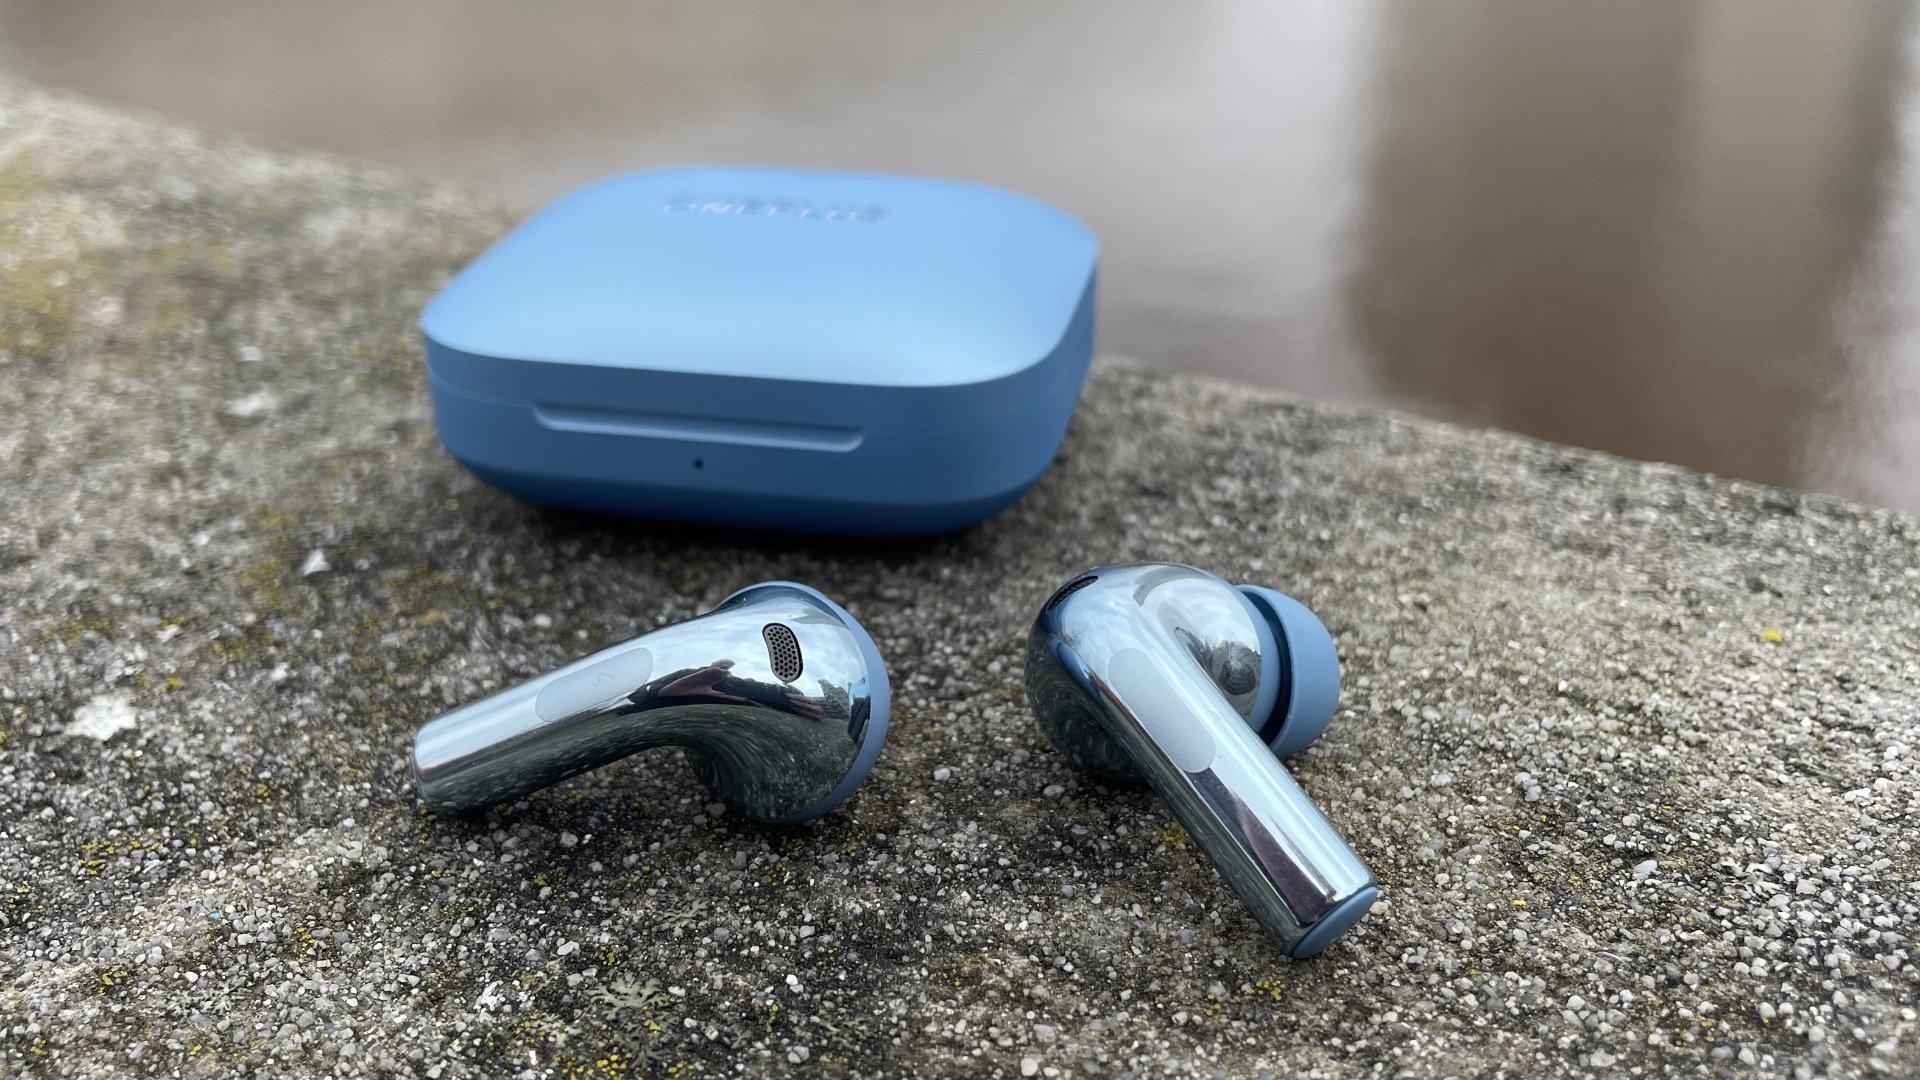 OnePlus Buds 3 Are Excellent Earbuds For Those Who Don't Want to Spend a Lot